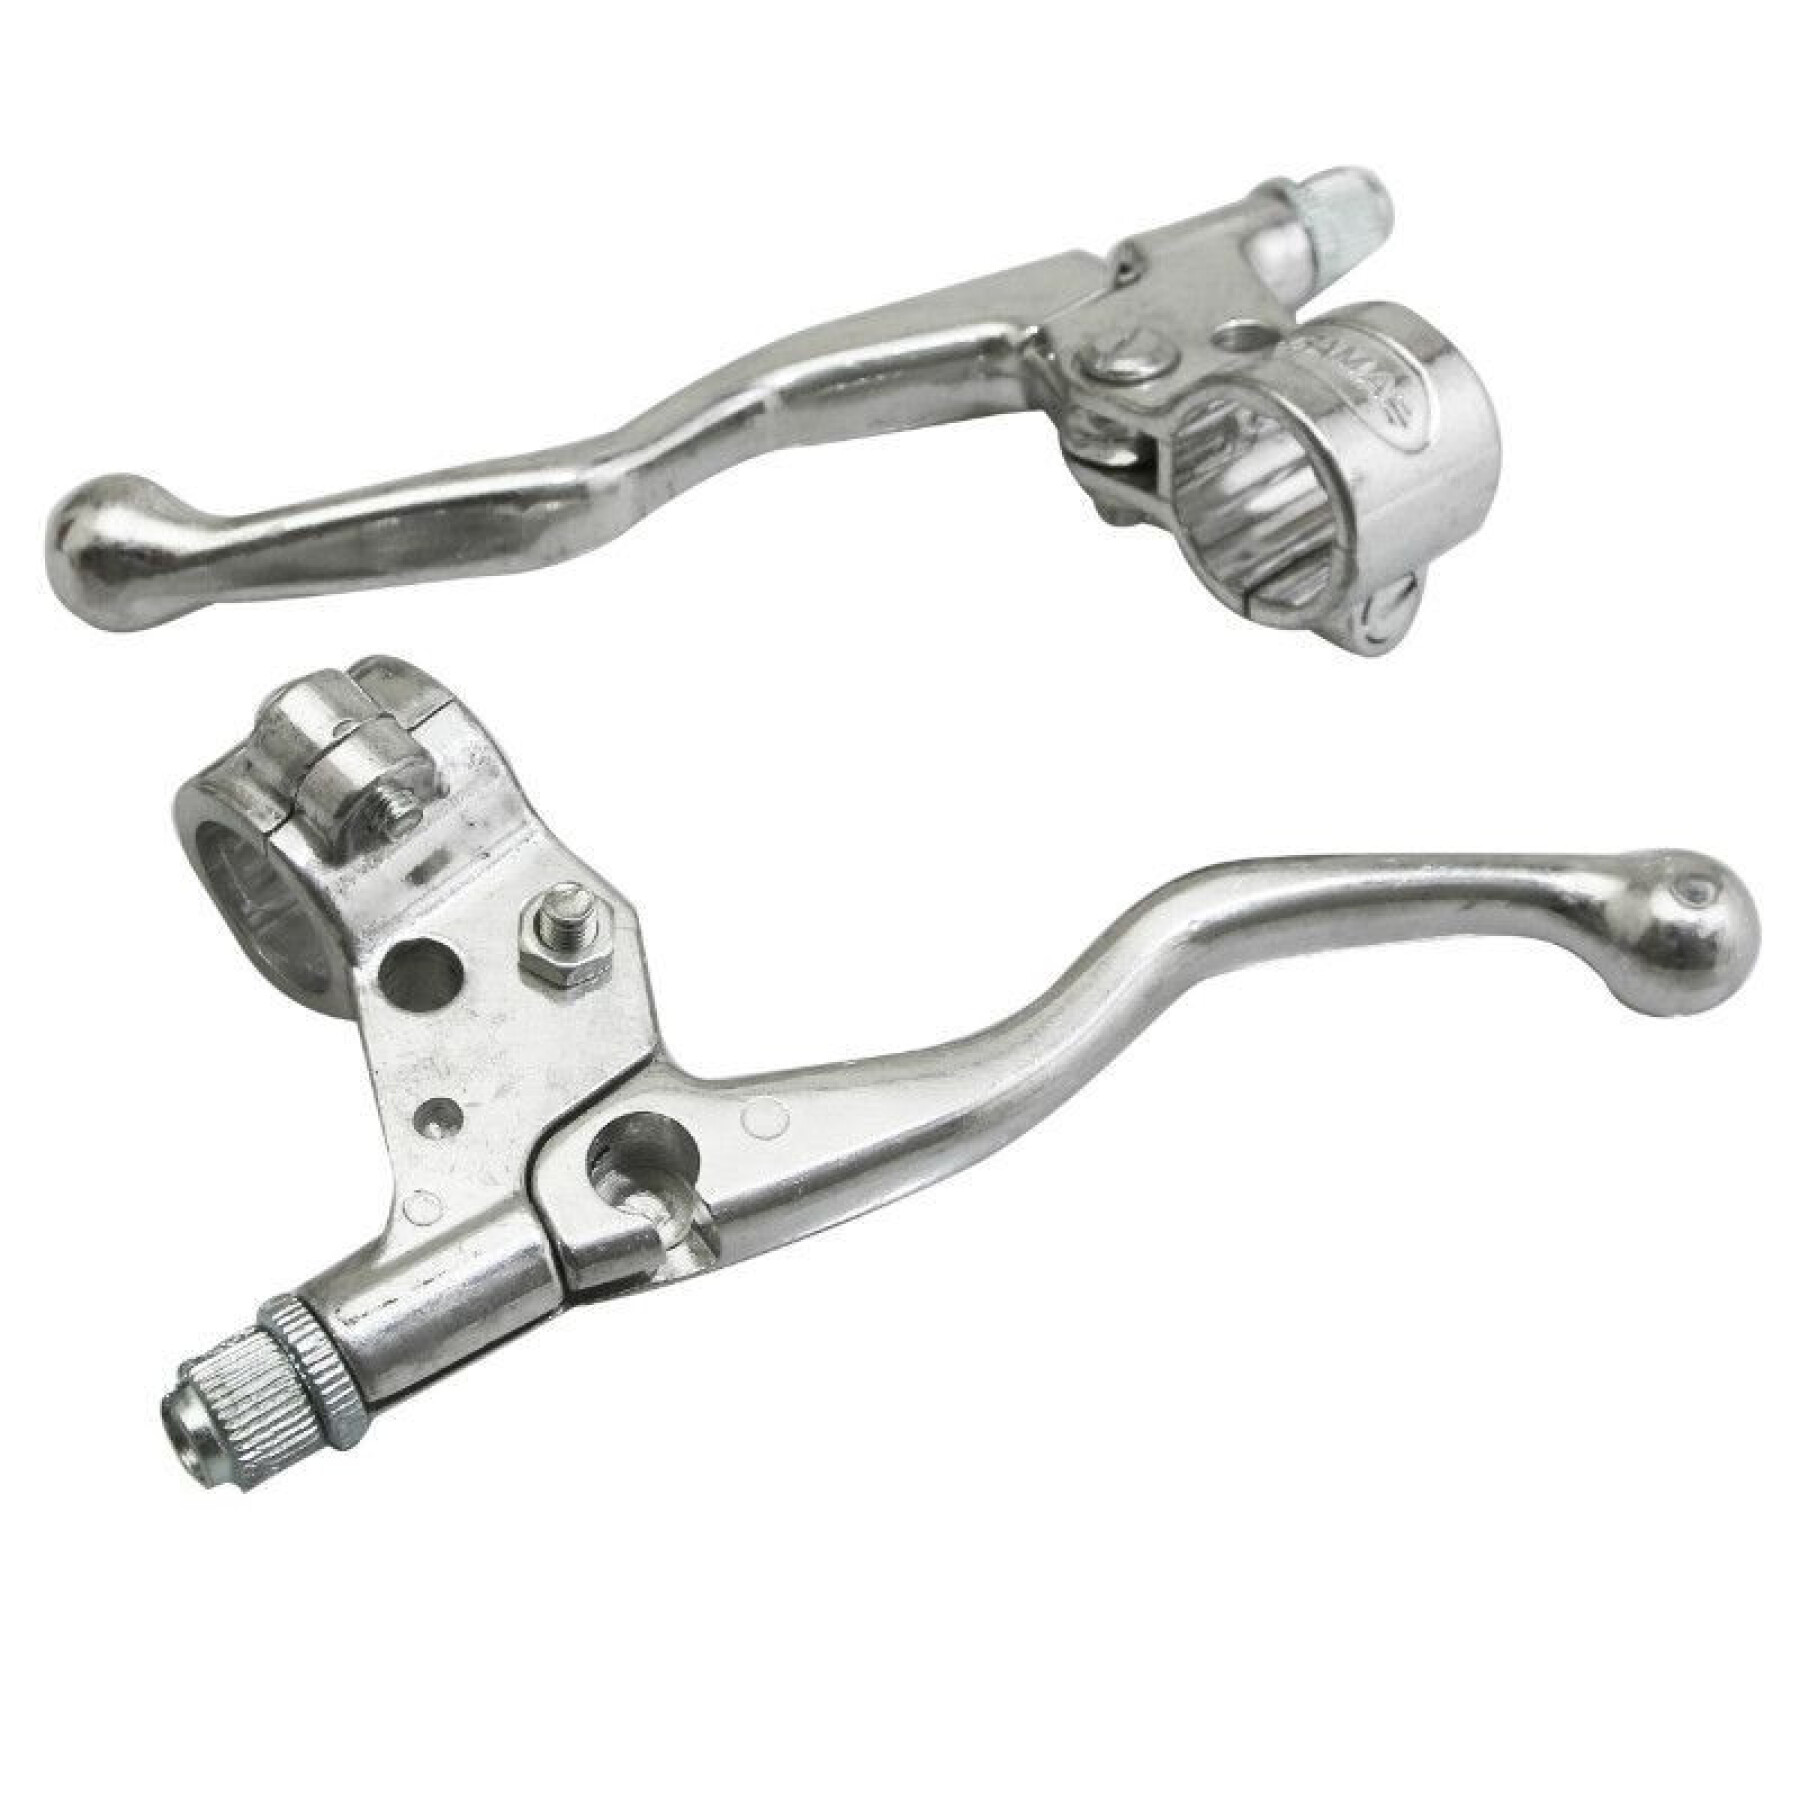 Pair of brake levers and handles Replay Lusito